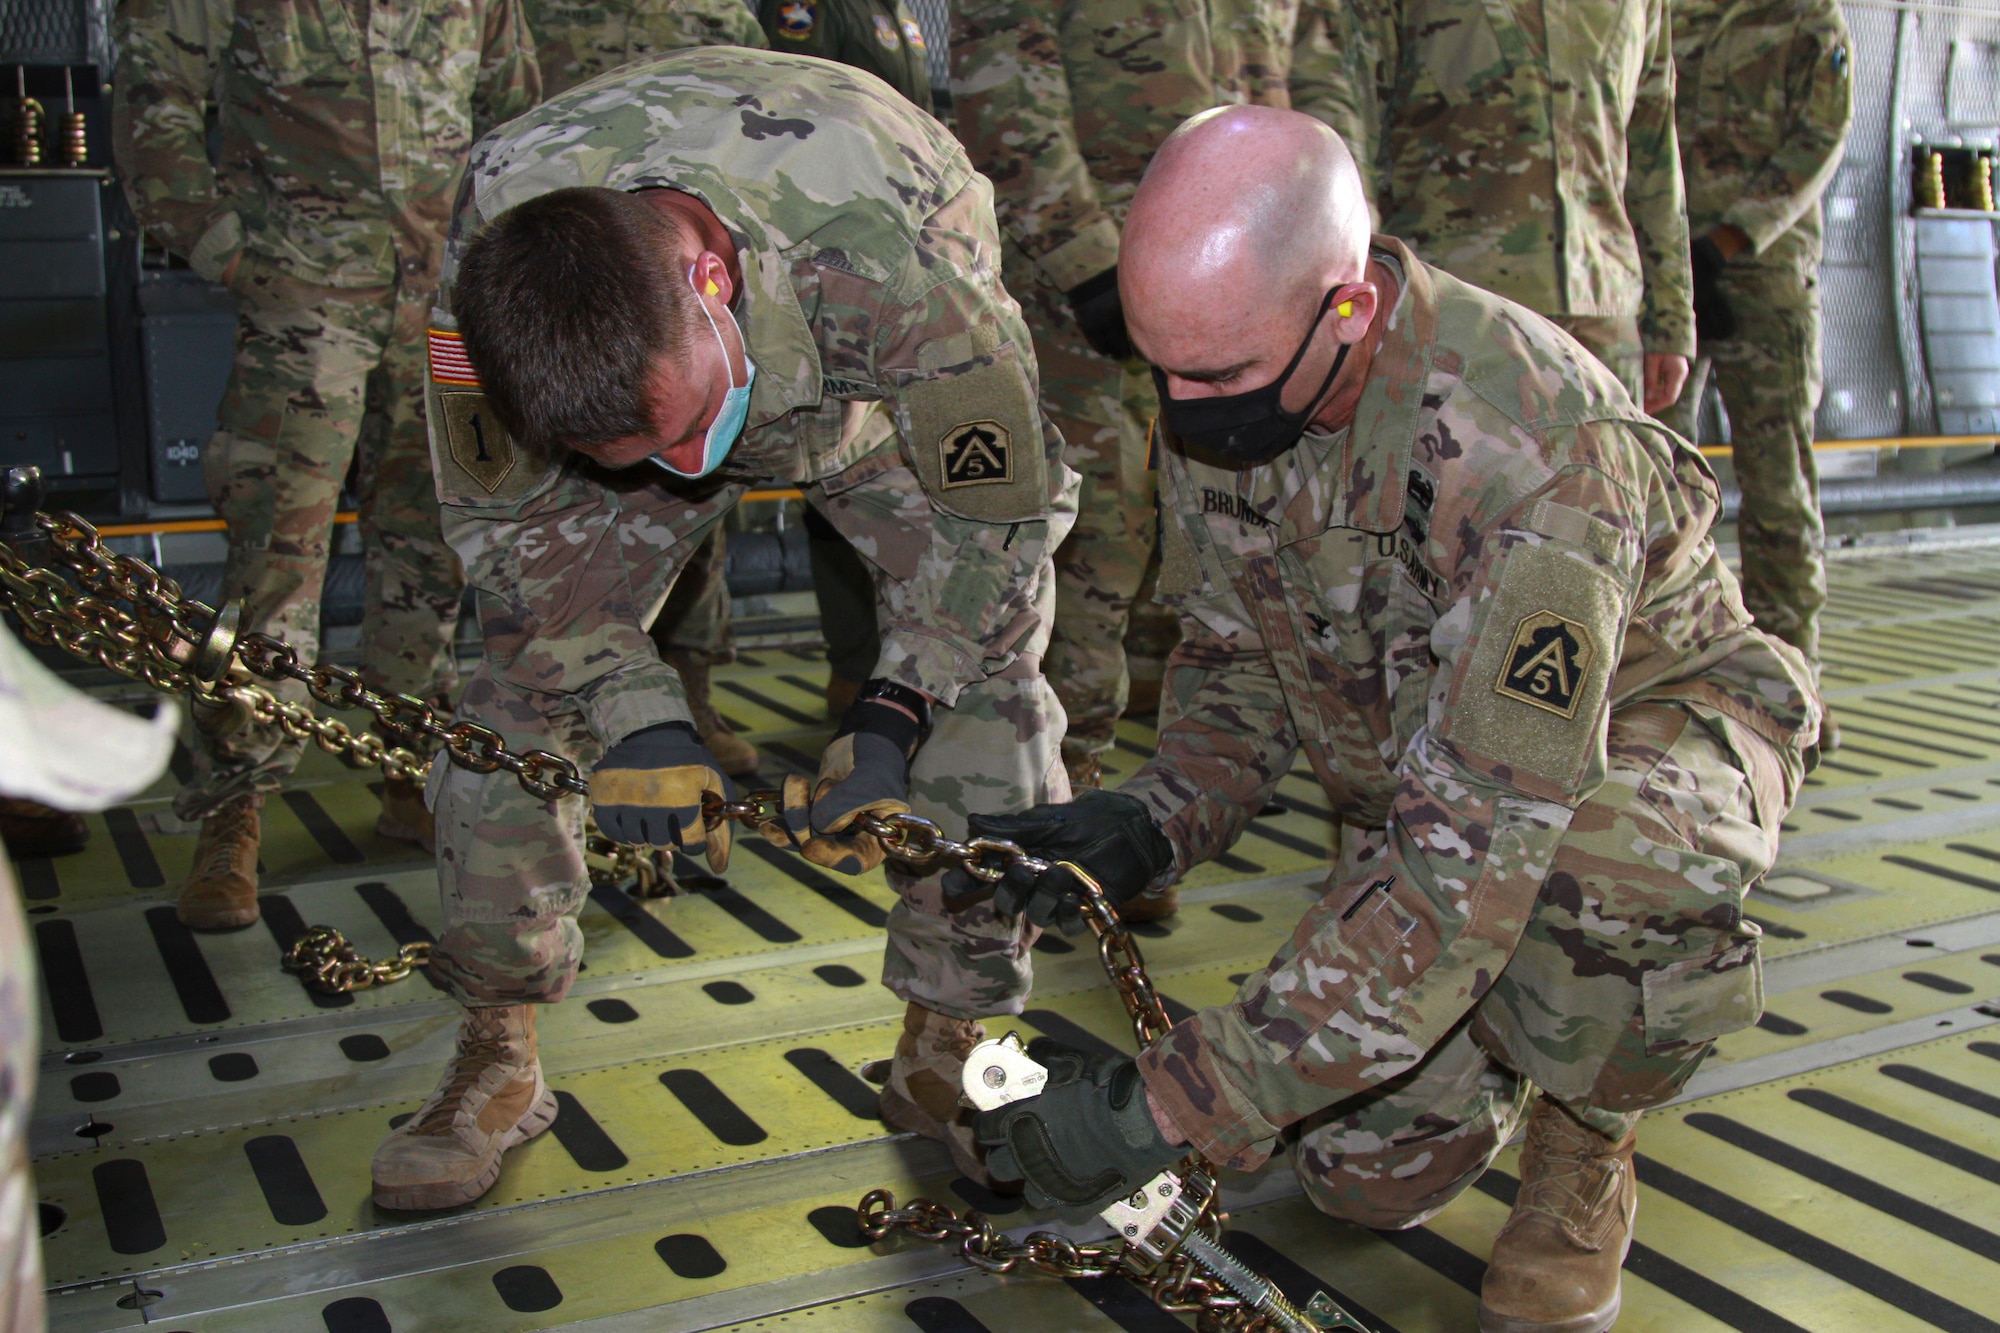 Col. Charles Brundrett (right), U.S. Army North’s Task Force 51’s operations officer, and Lt. Col. Jeremy Gottshall (left), U.S. Army North Task Force 51’s logistic officer, in charge work together to chain down a vehicle, during the unit’s Level II Deployment Readiness Exercise at Joint Base San Antonio-Kelly Field Annex Nov. 20.